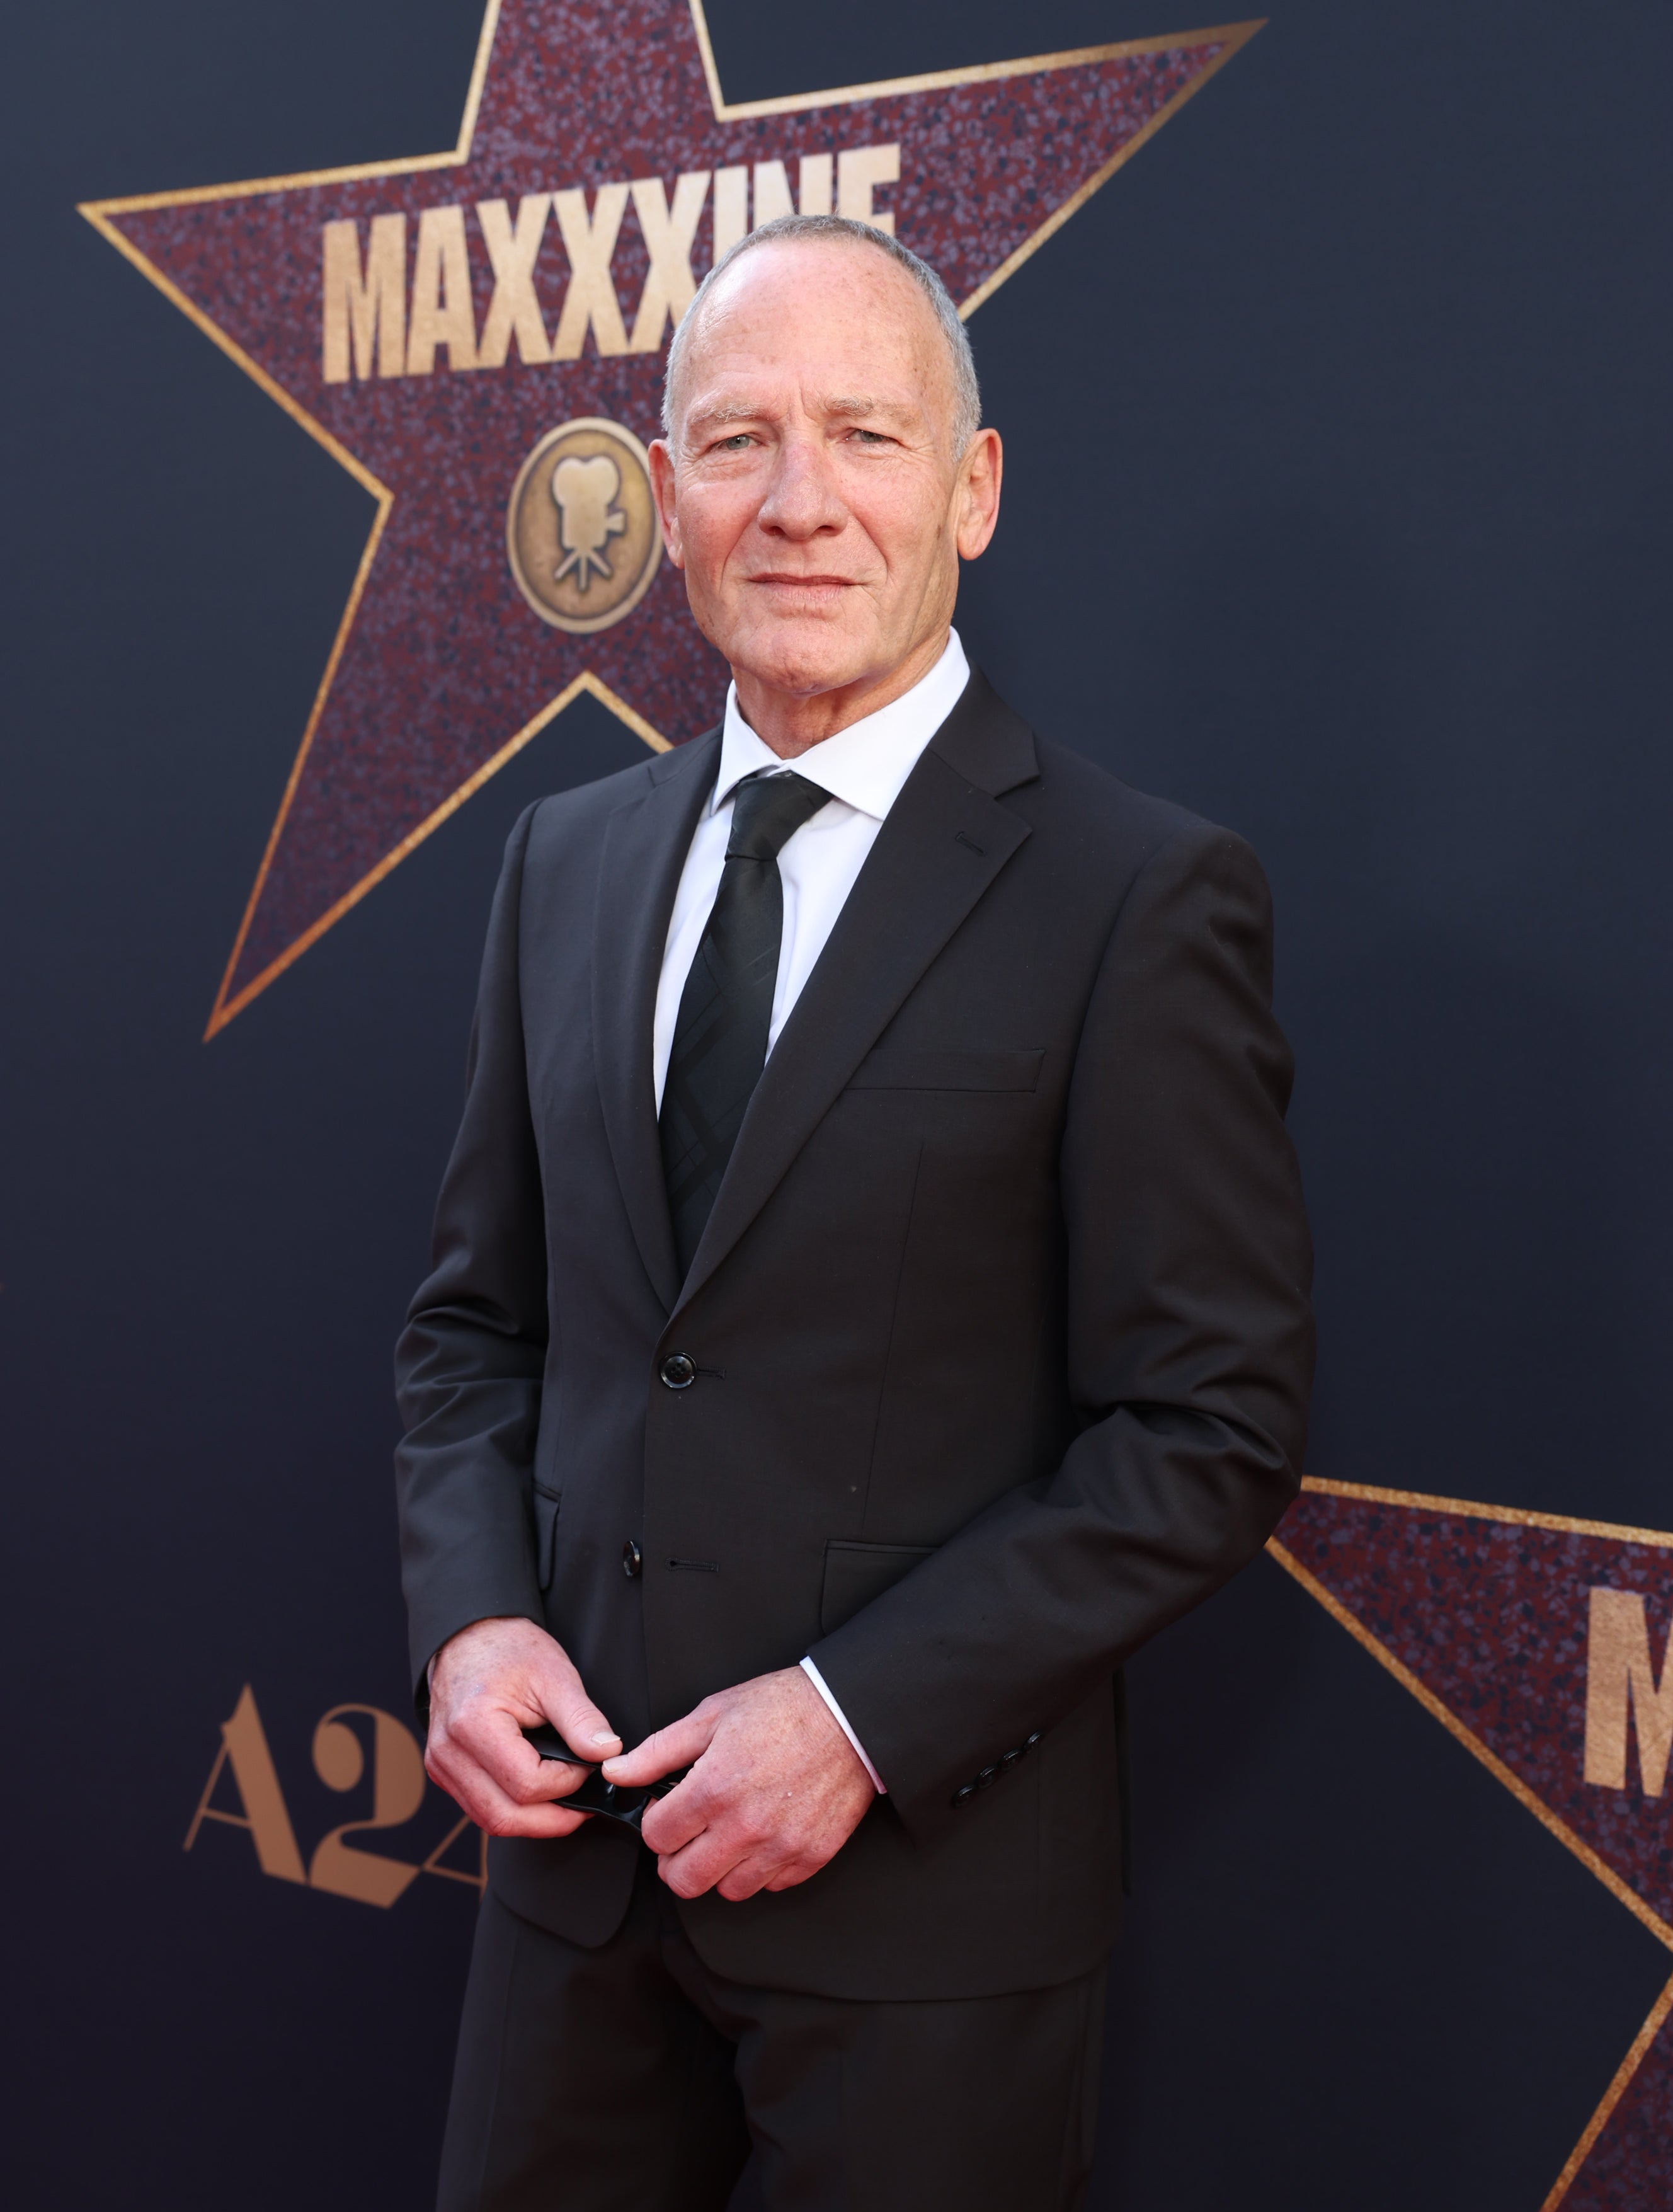 Simon Prast in a suit and tie at the premiere of &quot;MaXXXine&quot;